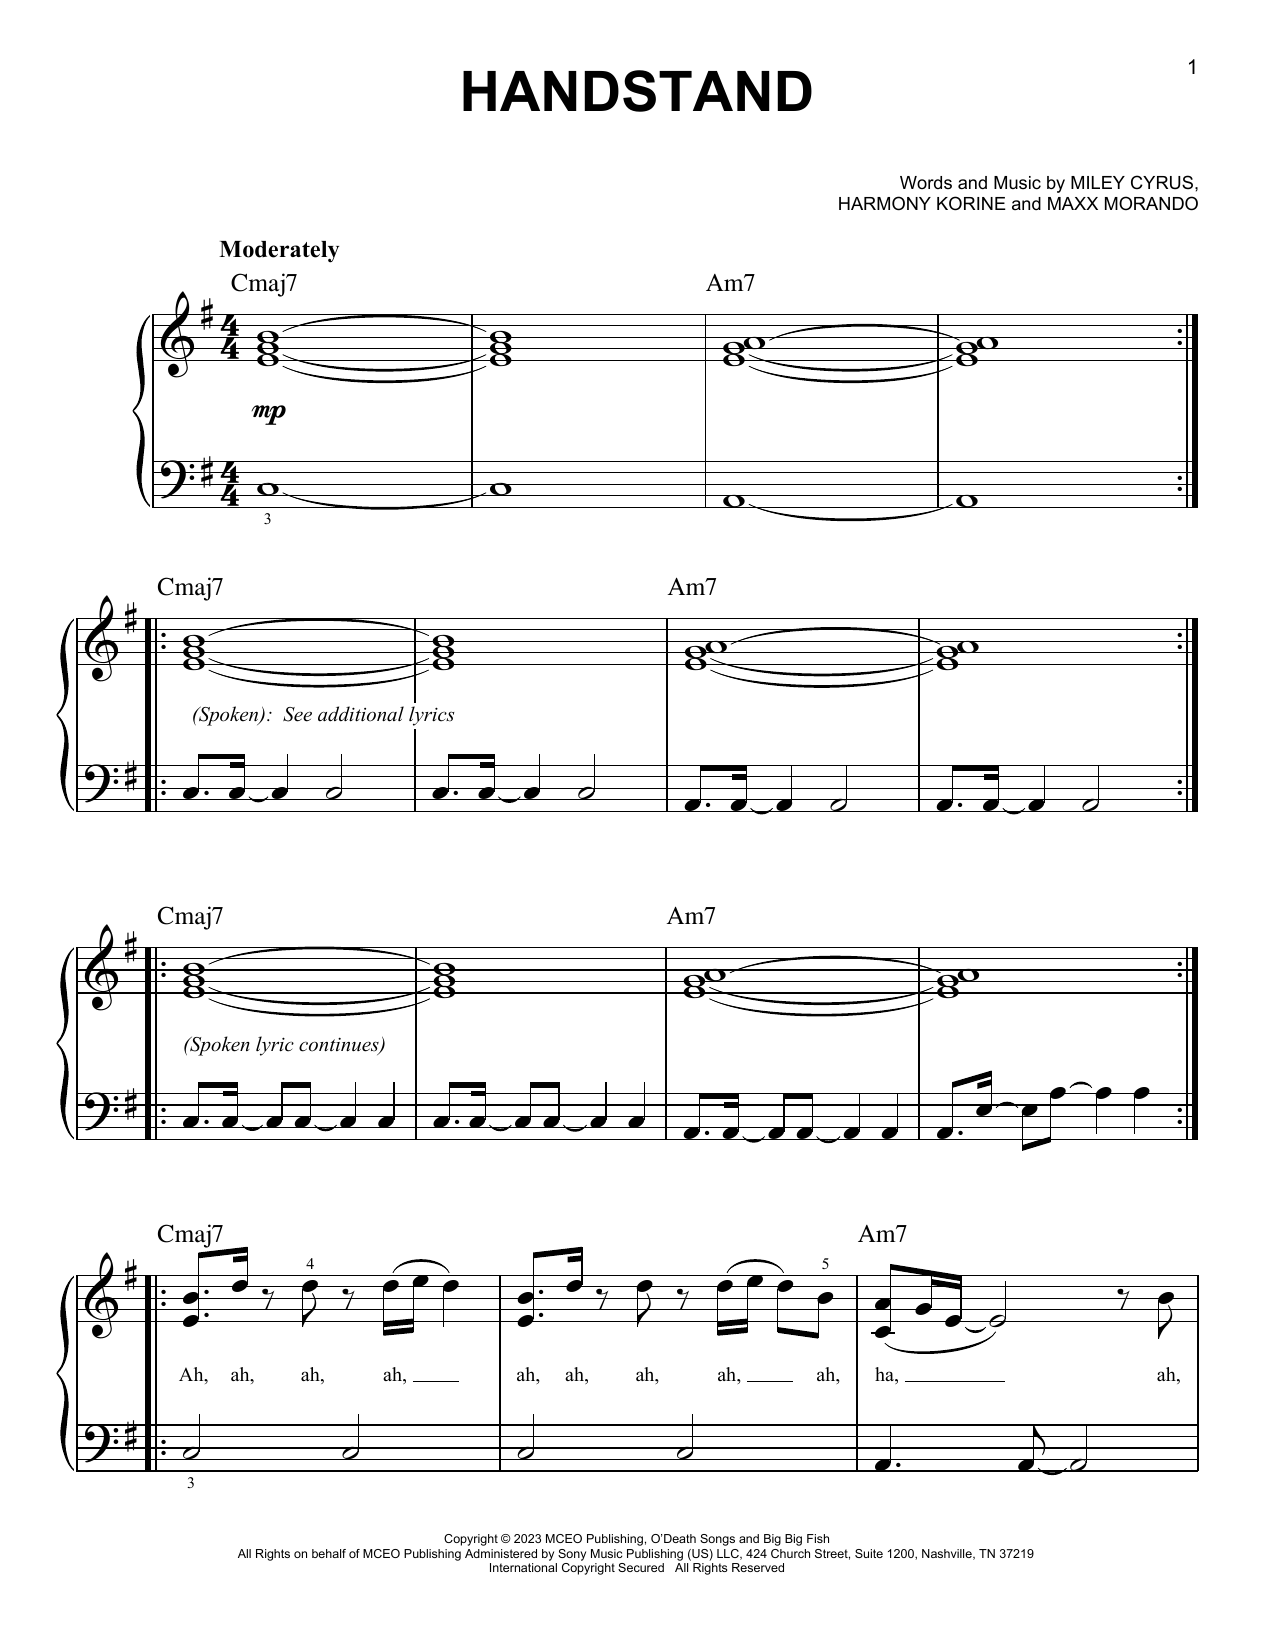 Download Miley Cyrus Handstand Sheet Music